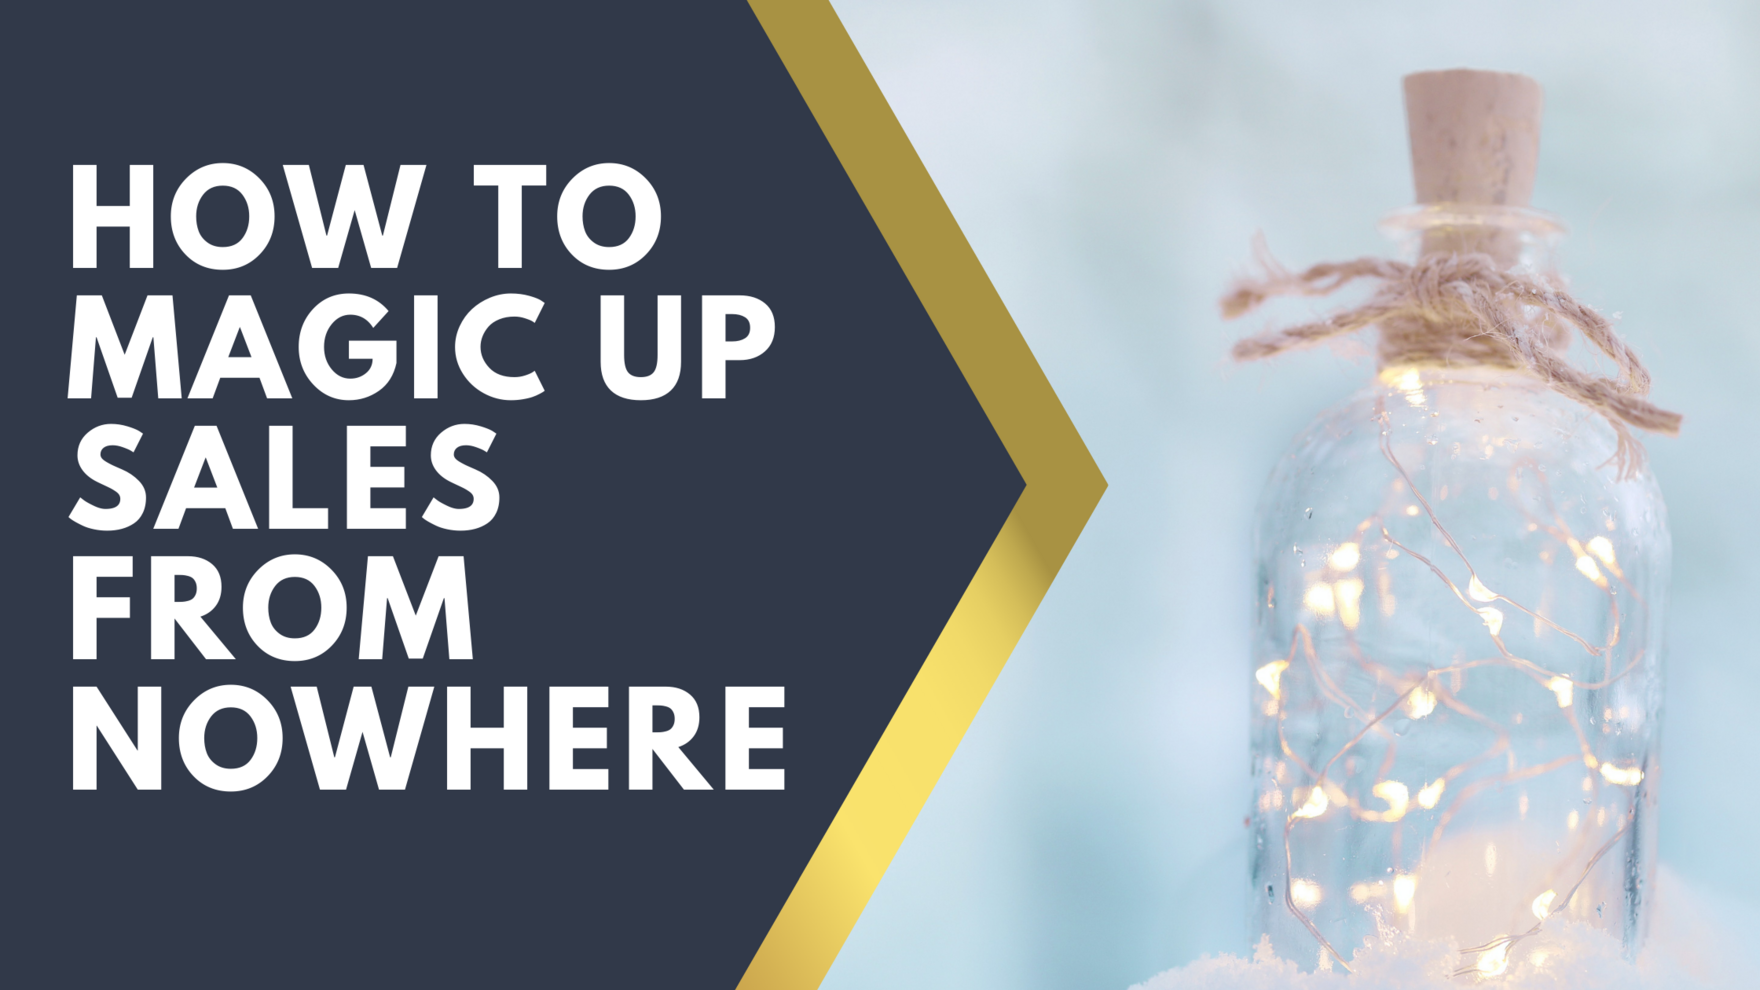 HOW TO MAGIC UP SALES FROM NOWHERE (1)